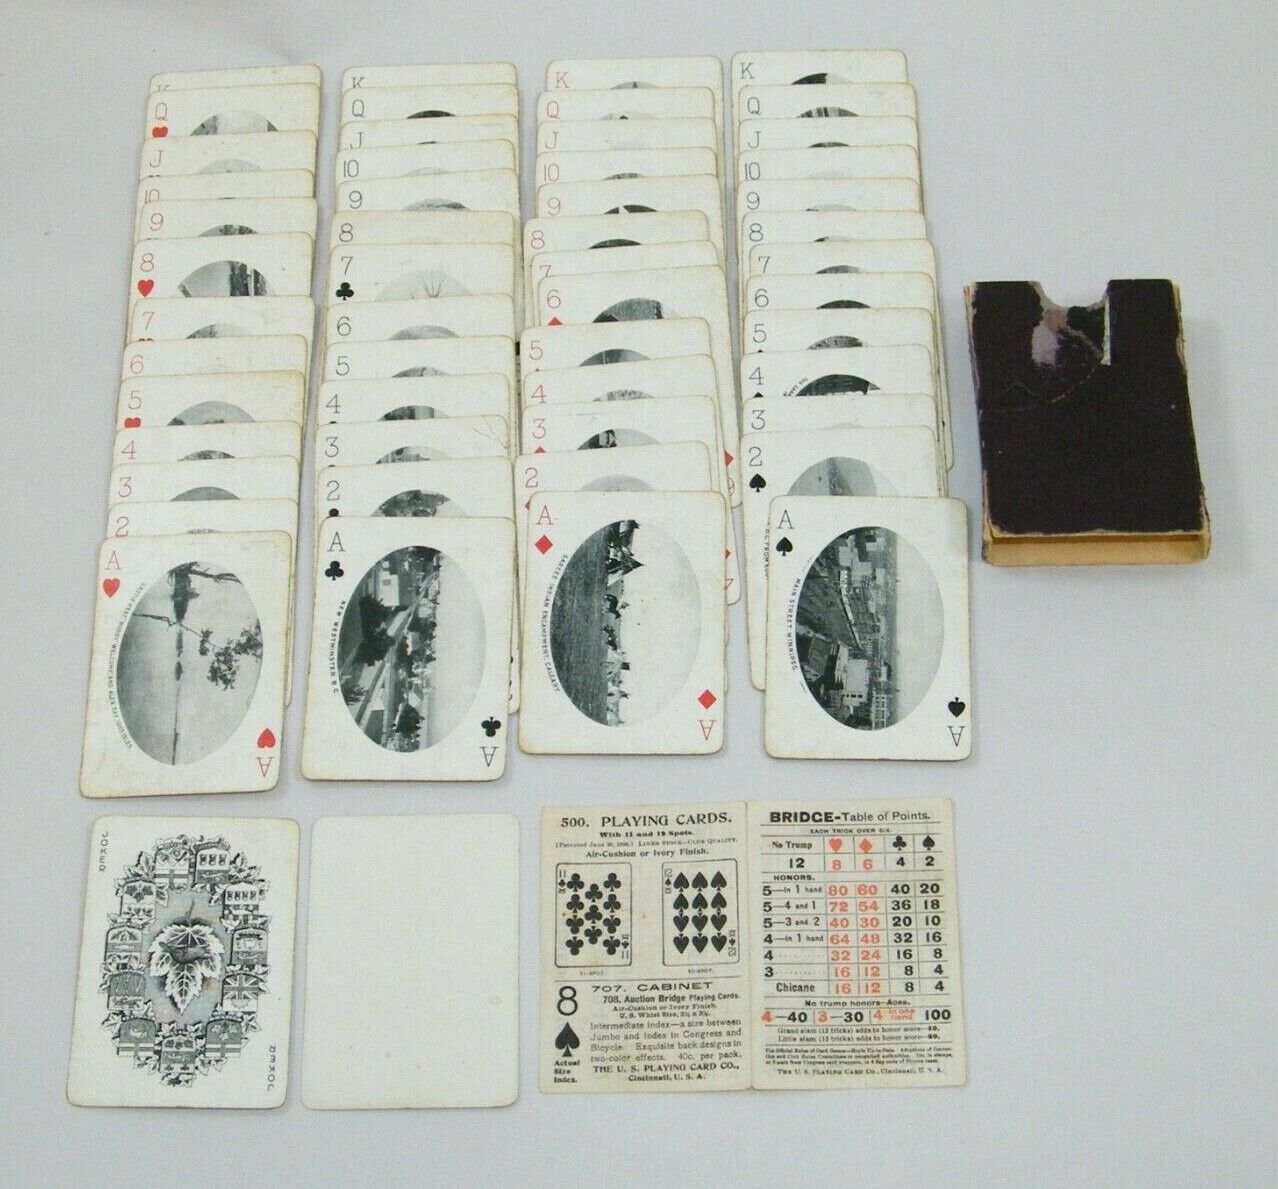 1905 THE US PLAYING CARD CO SOUVENIR CANADA PICTURESQUE CARDS